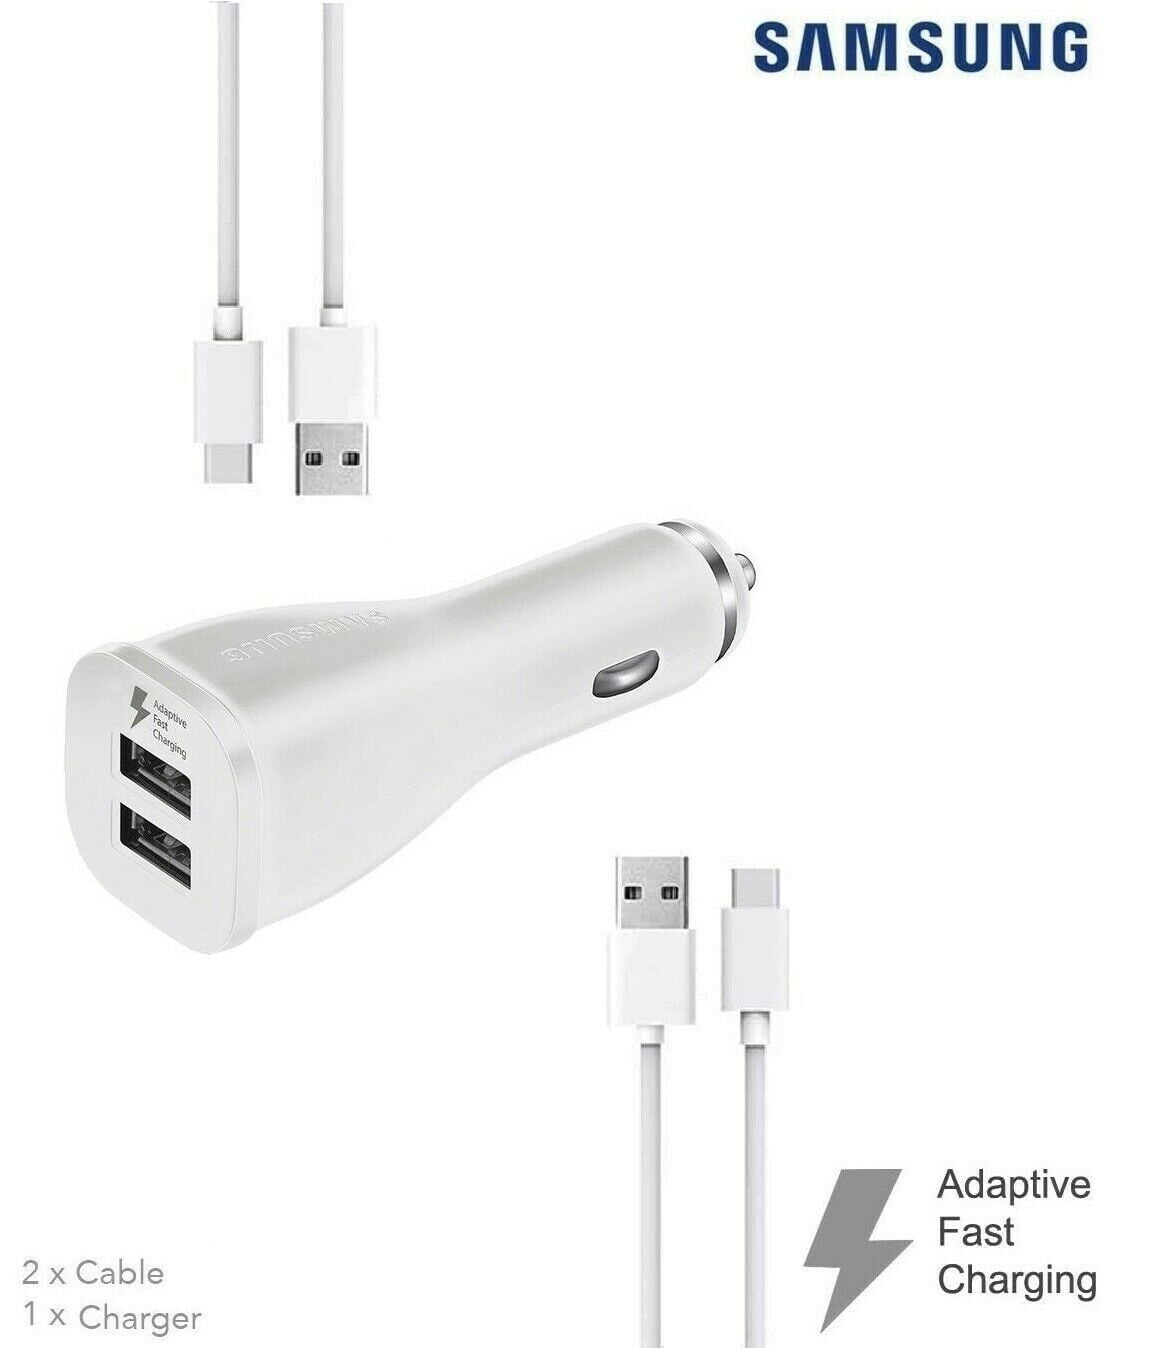 Bliver værre dosis lugtfri for OnePlus 3T Charger! Adaptive Fast Charger Kit [1 Dual Port Car Charger  + 2 Type-C Cables] True Digital Adaptive Fast Charging uses dual voltages  for up to 50% faster charging! - Walmart.com